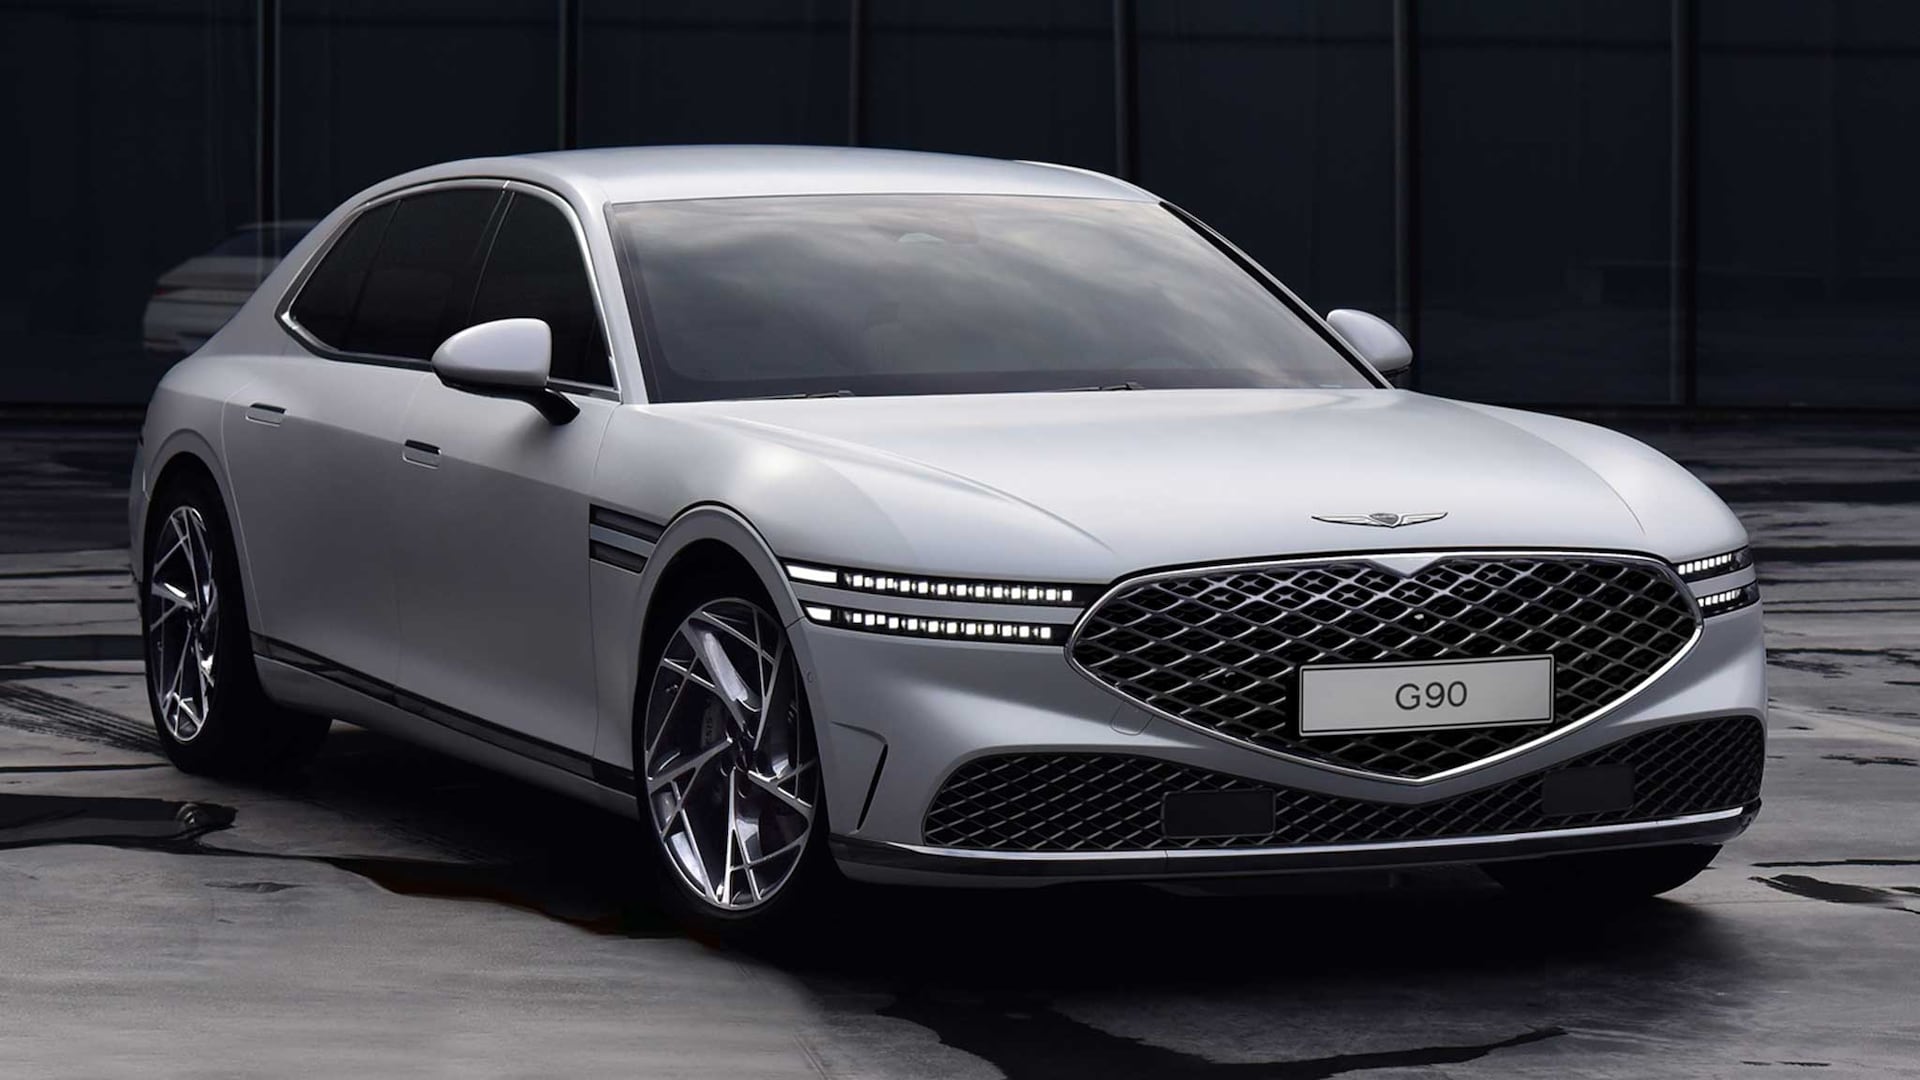 2023 Genesis G90 First Image: An Unapologetically Luxurious Sedan